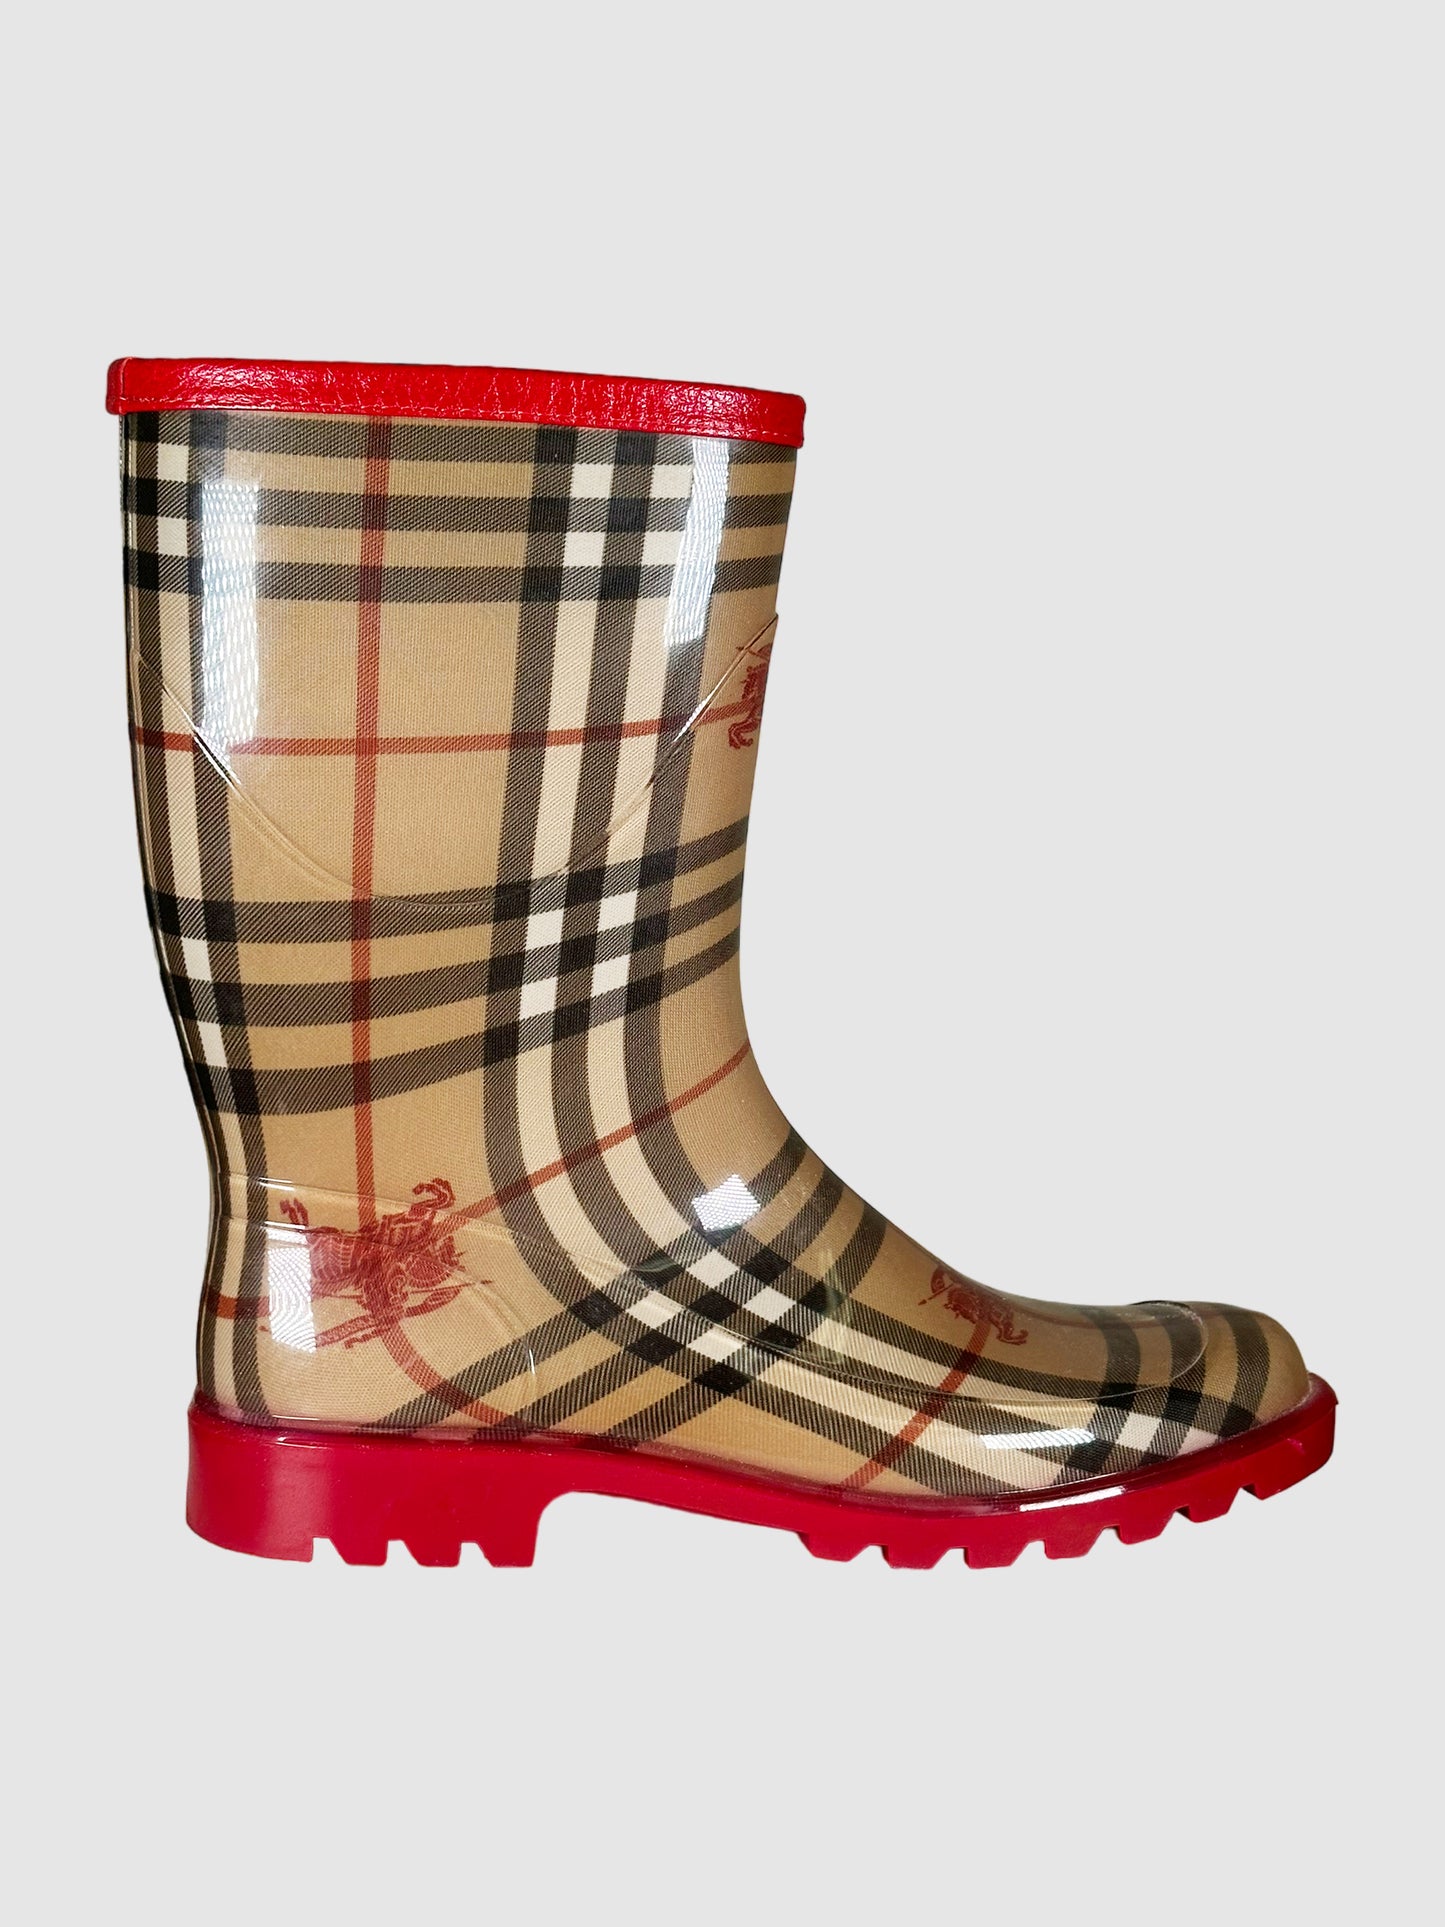 Burberry House Check Pattern Rubber Rain Boots - Size 40